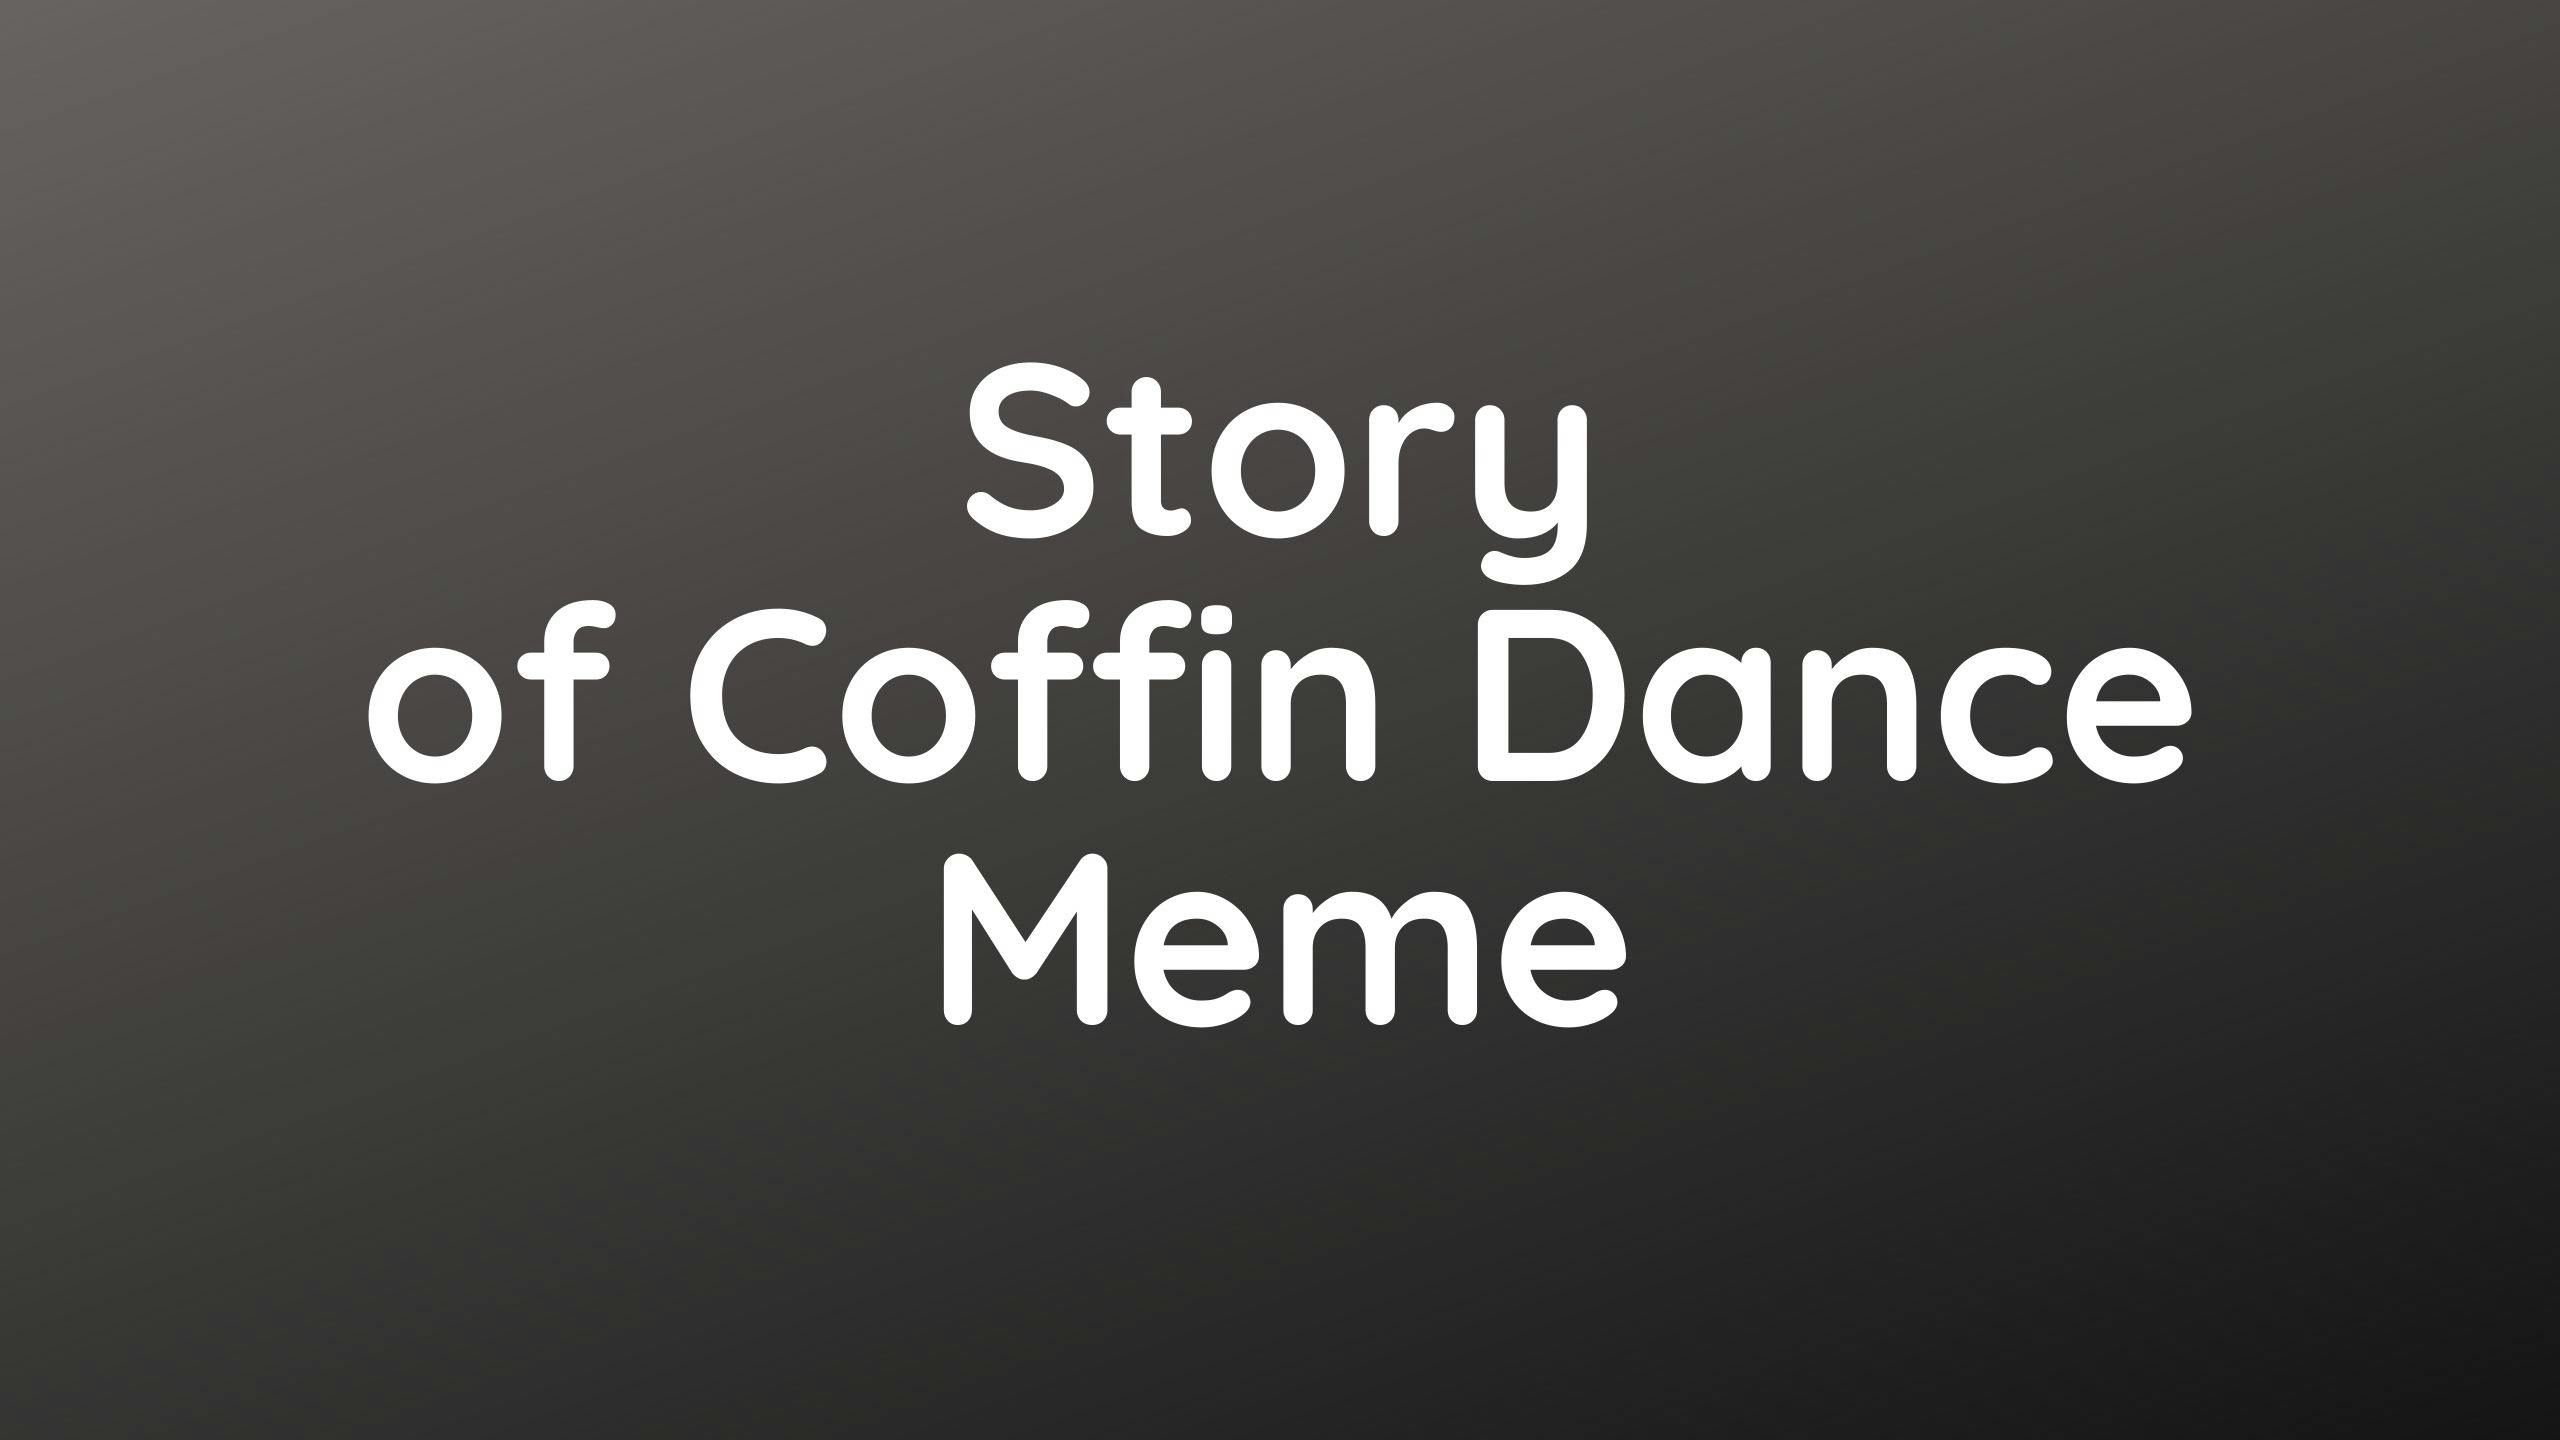 Real Story Behind Viral Coffin Dance Meme